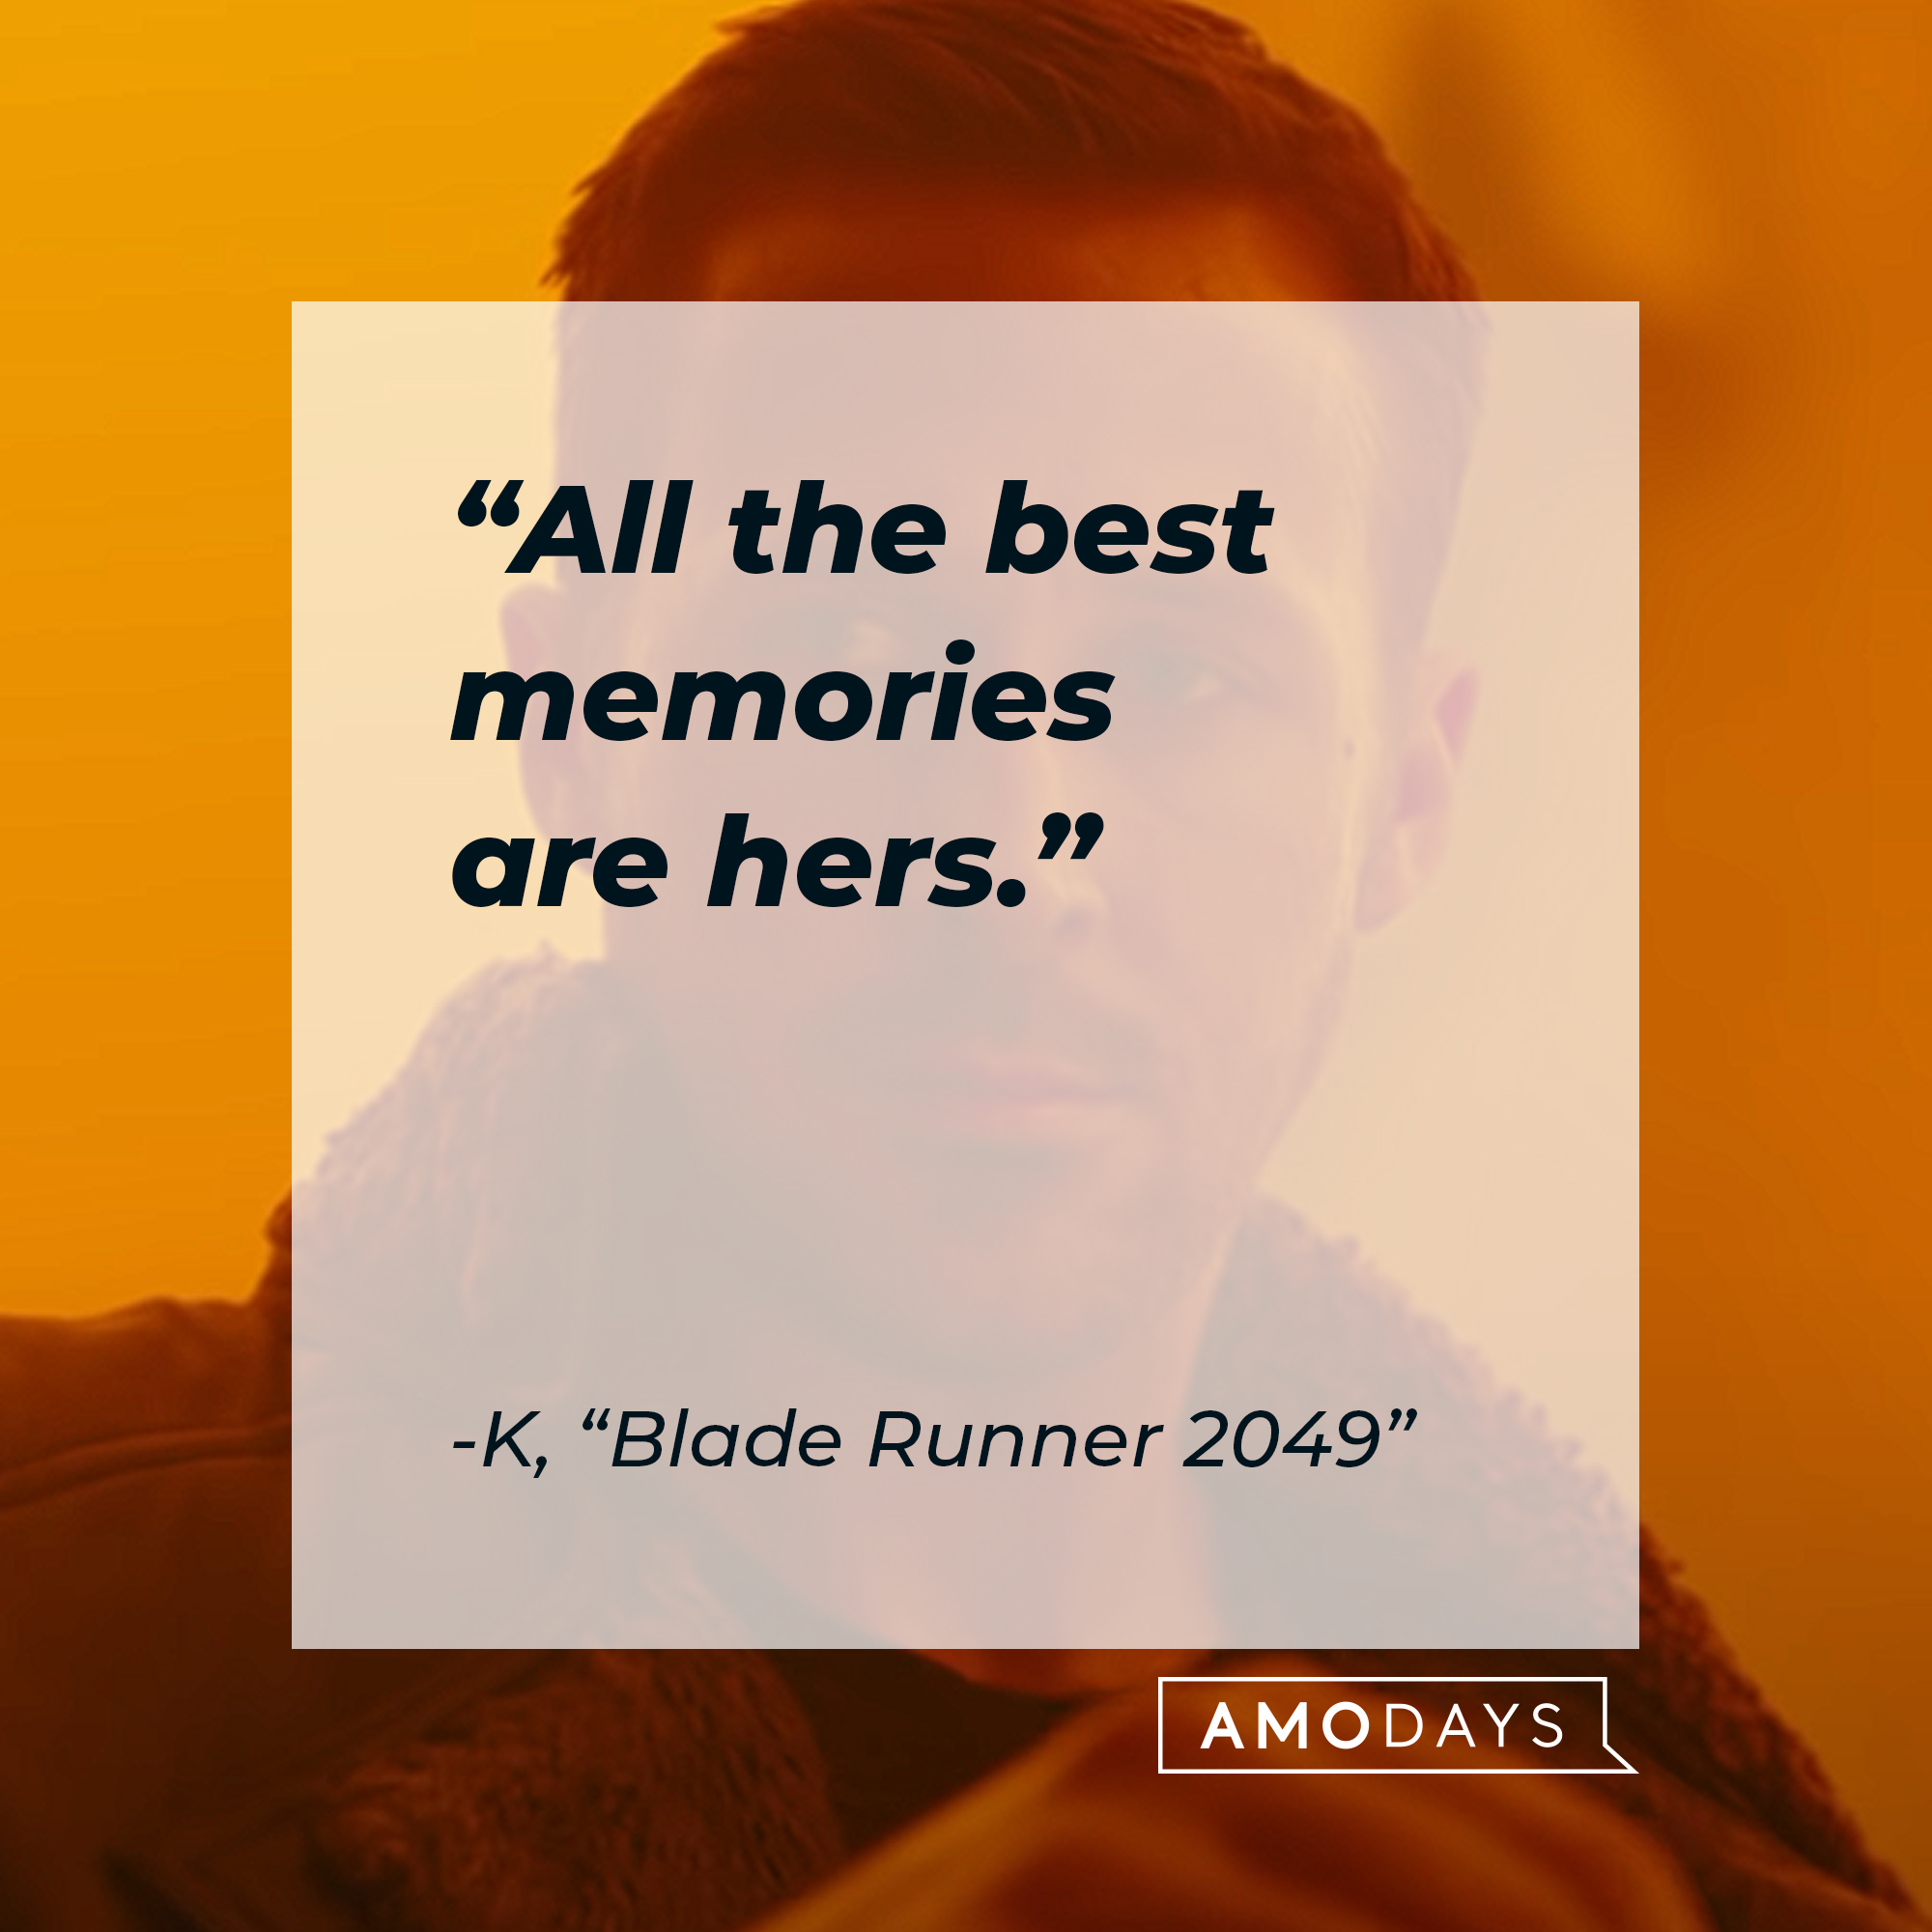 An image of Officer K with the quote: “All the best memories are hers.” | Source: Youtube.com/WarnerBrosPictures